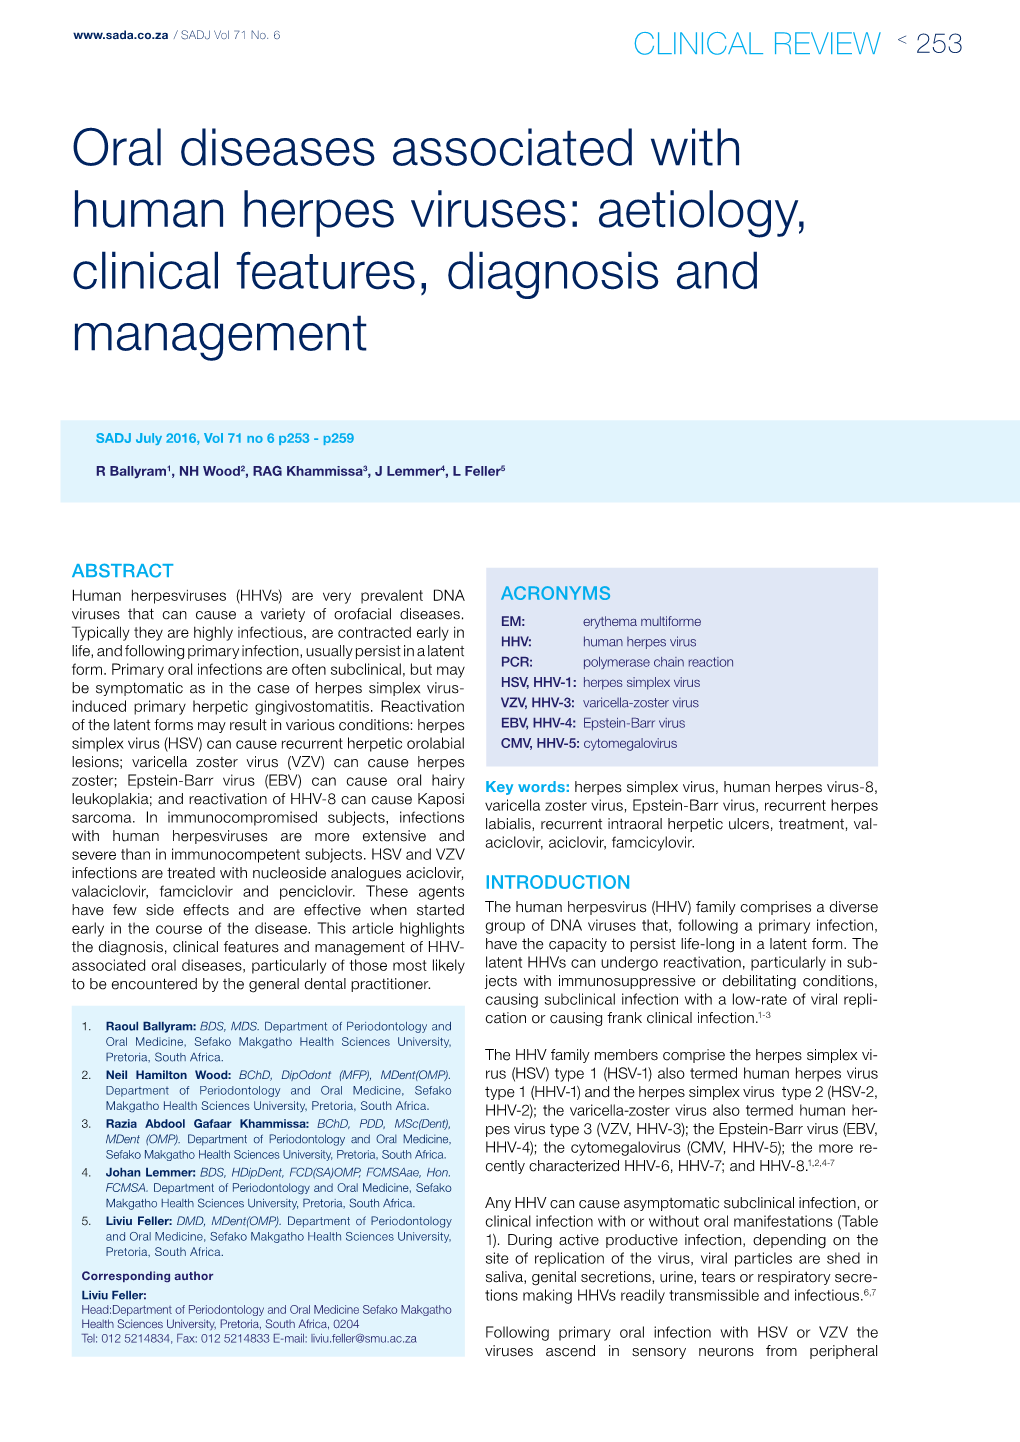 Oral Diseases Associated with Human Herpes Viruses: Aetiology, Clinical Features, Diagnosis and Management